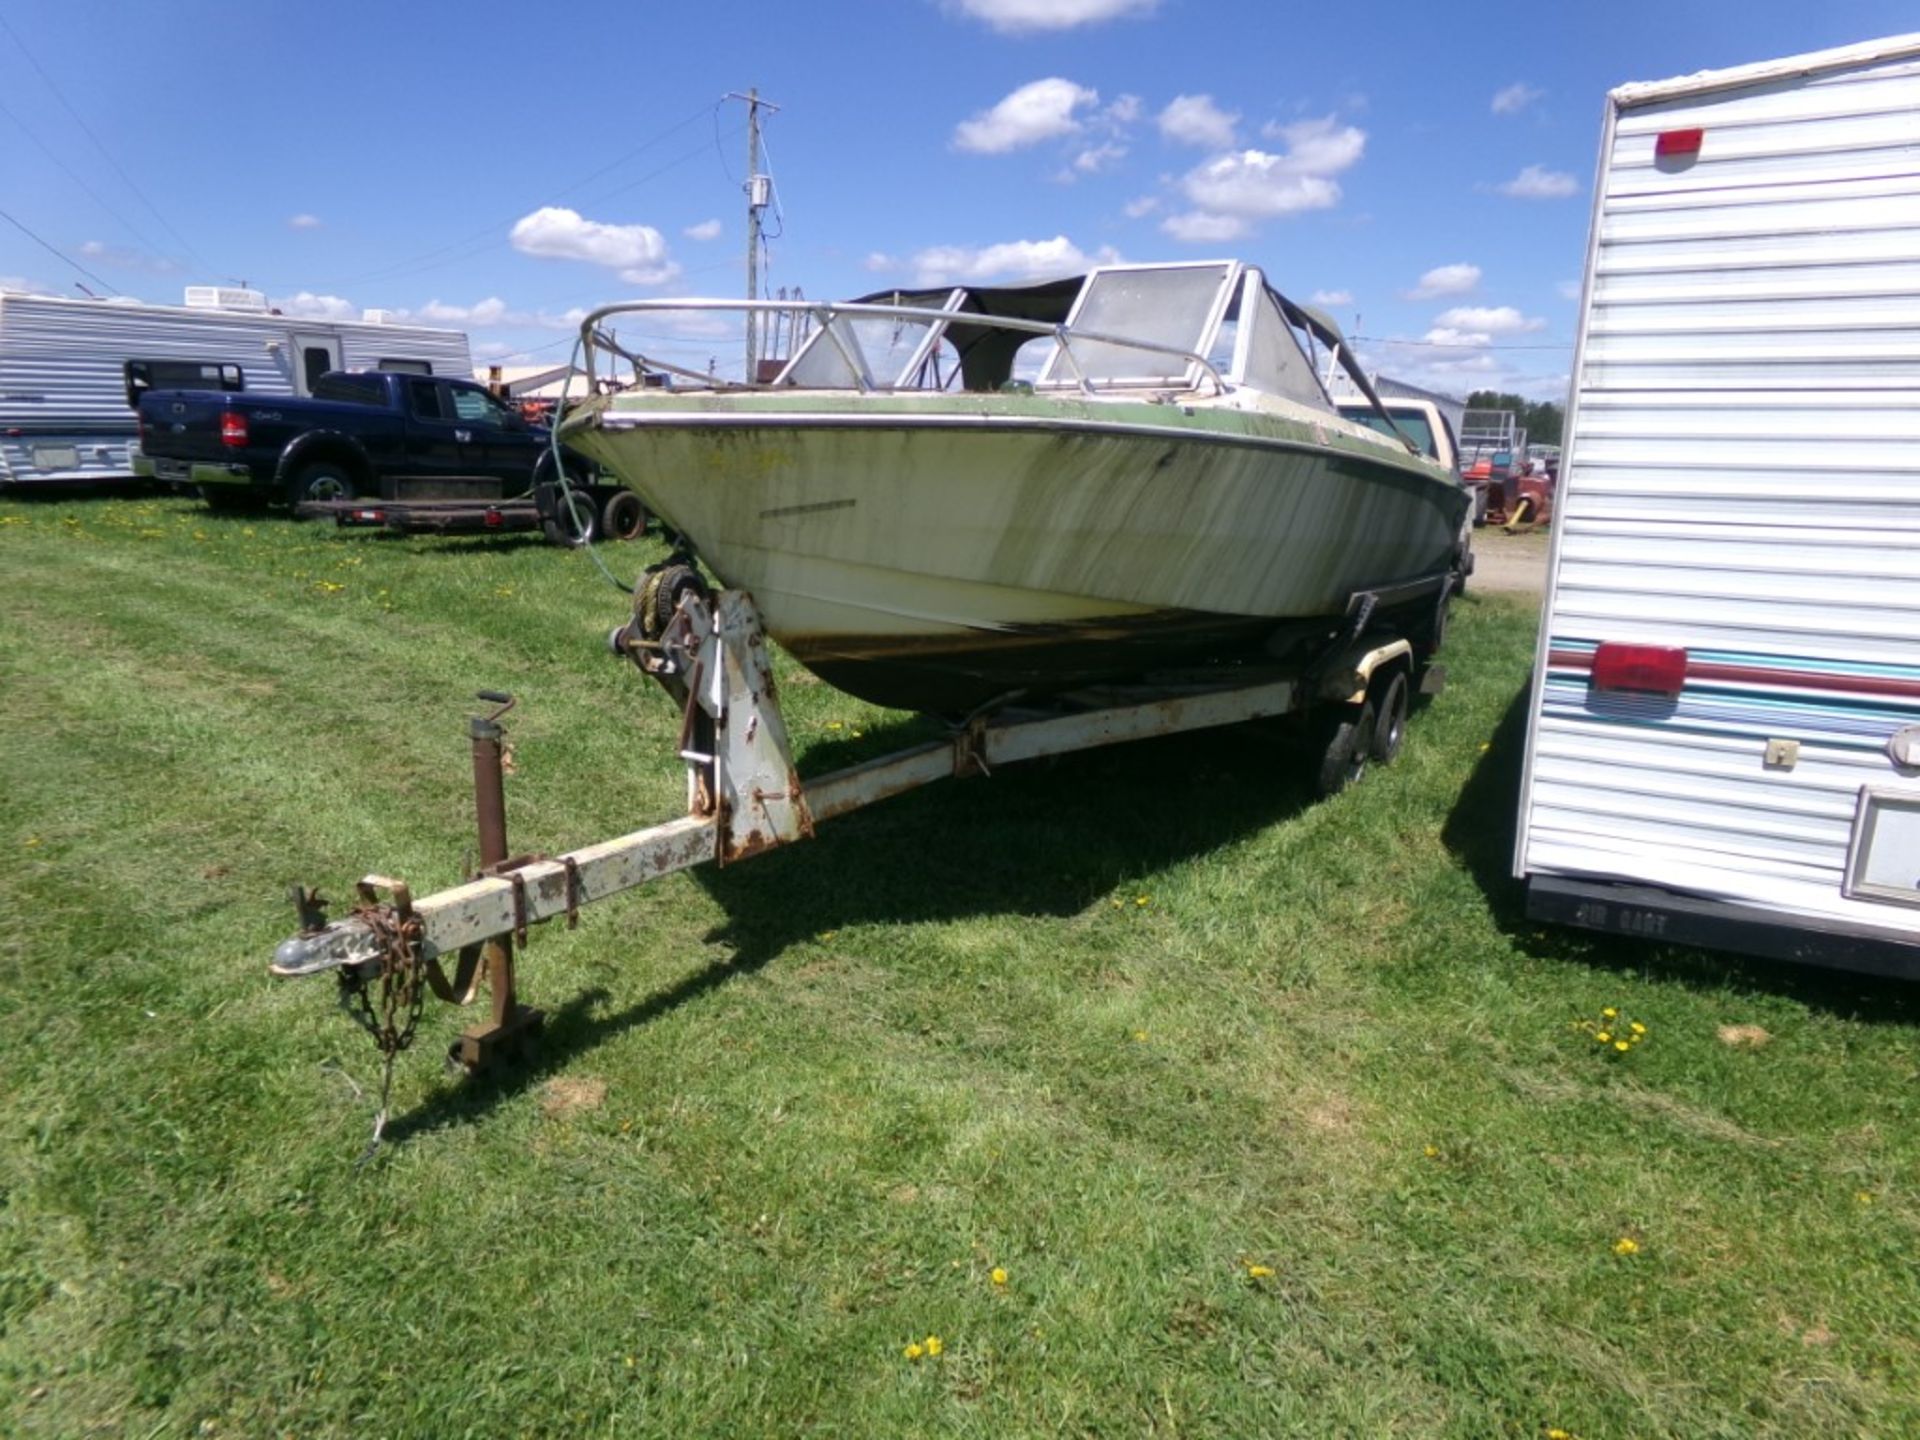 Glastron Closed Bow Fiberglass Boat, Inboard Inline 6 On Tandem Axle Trailer - NO PAPERWORK ON